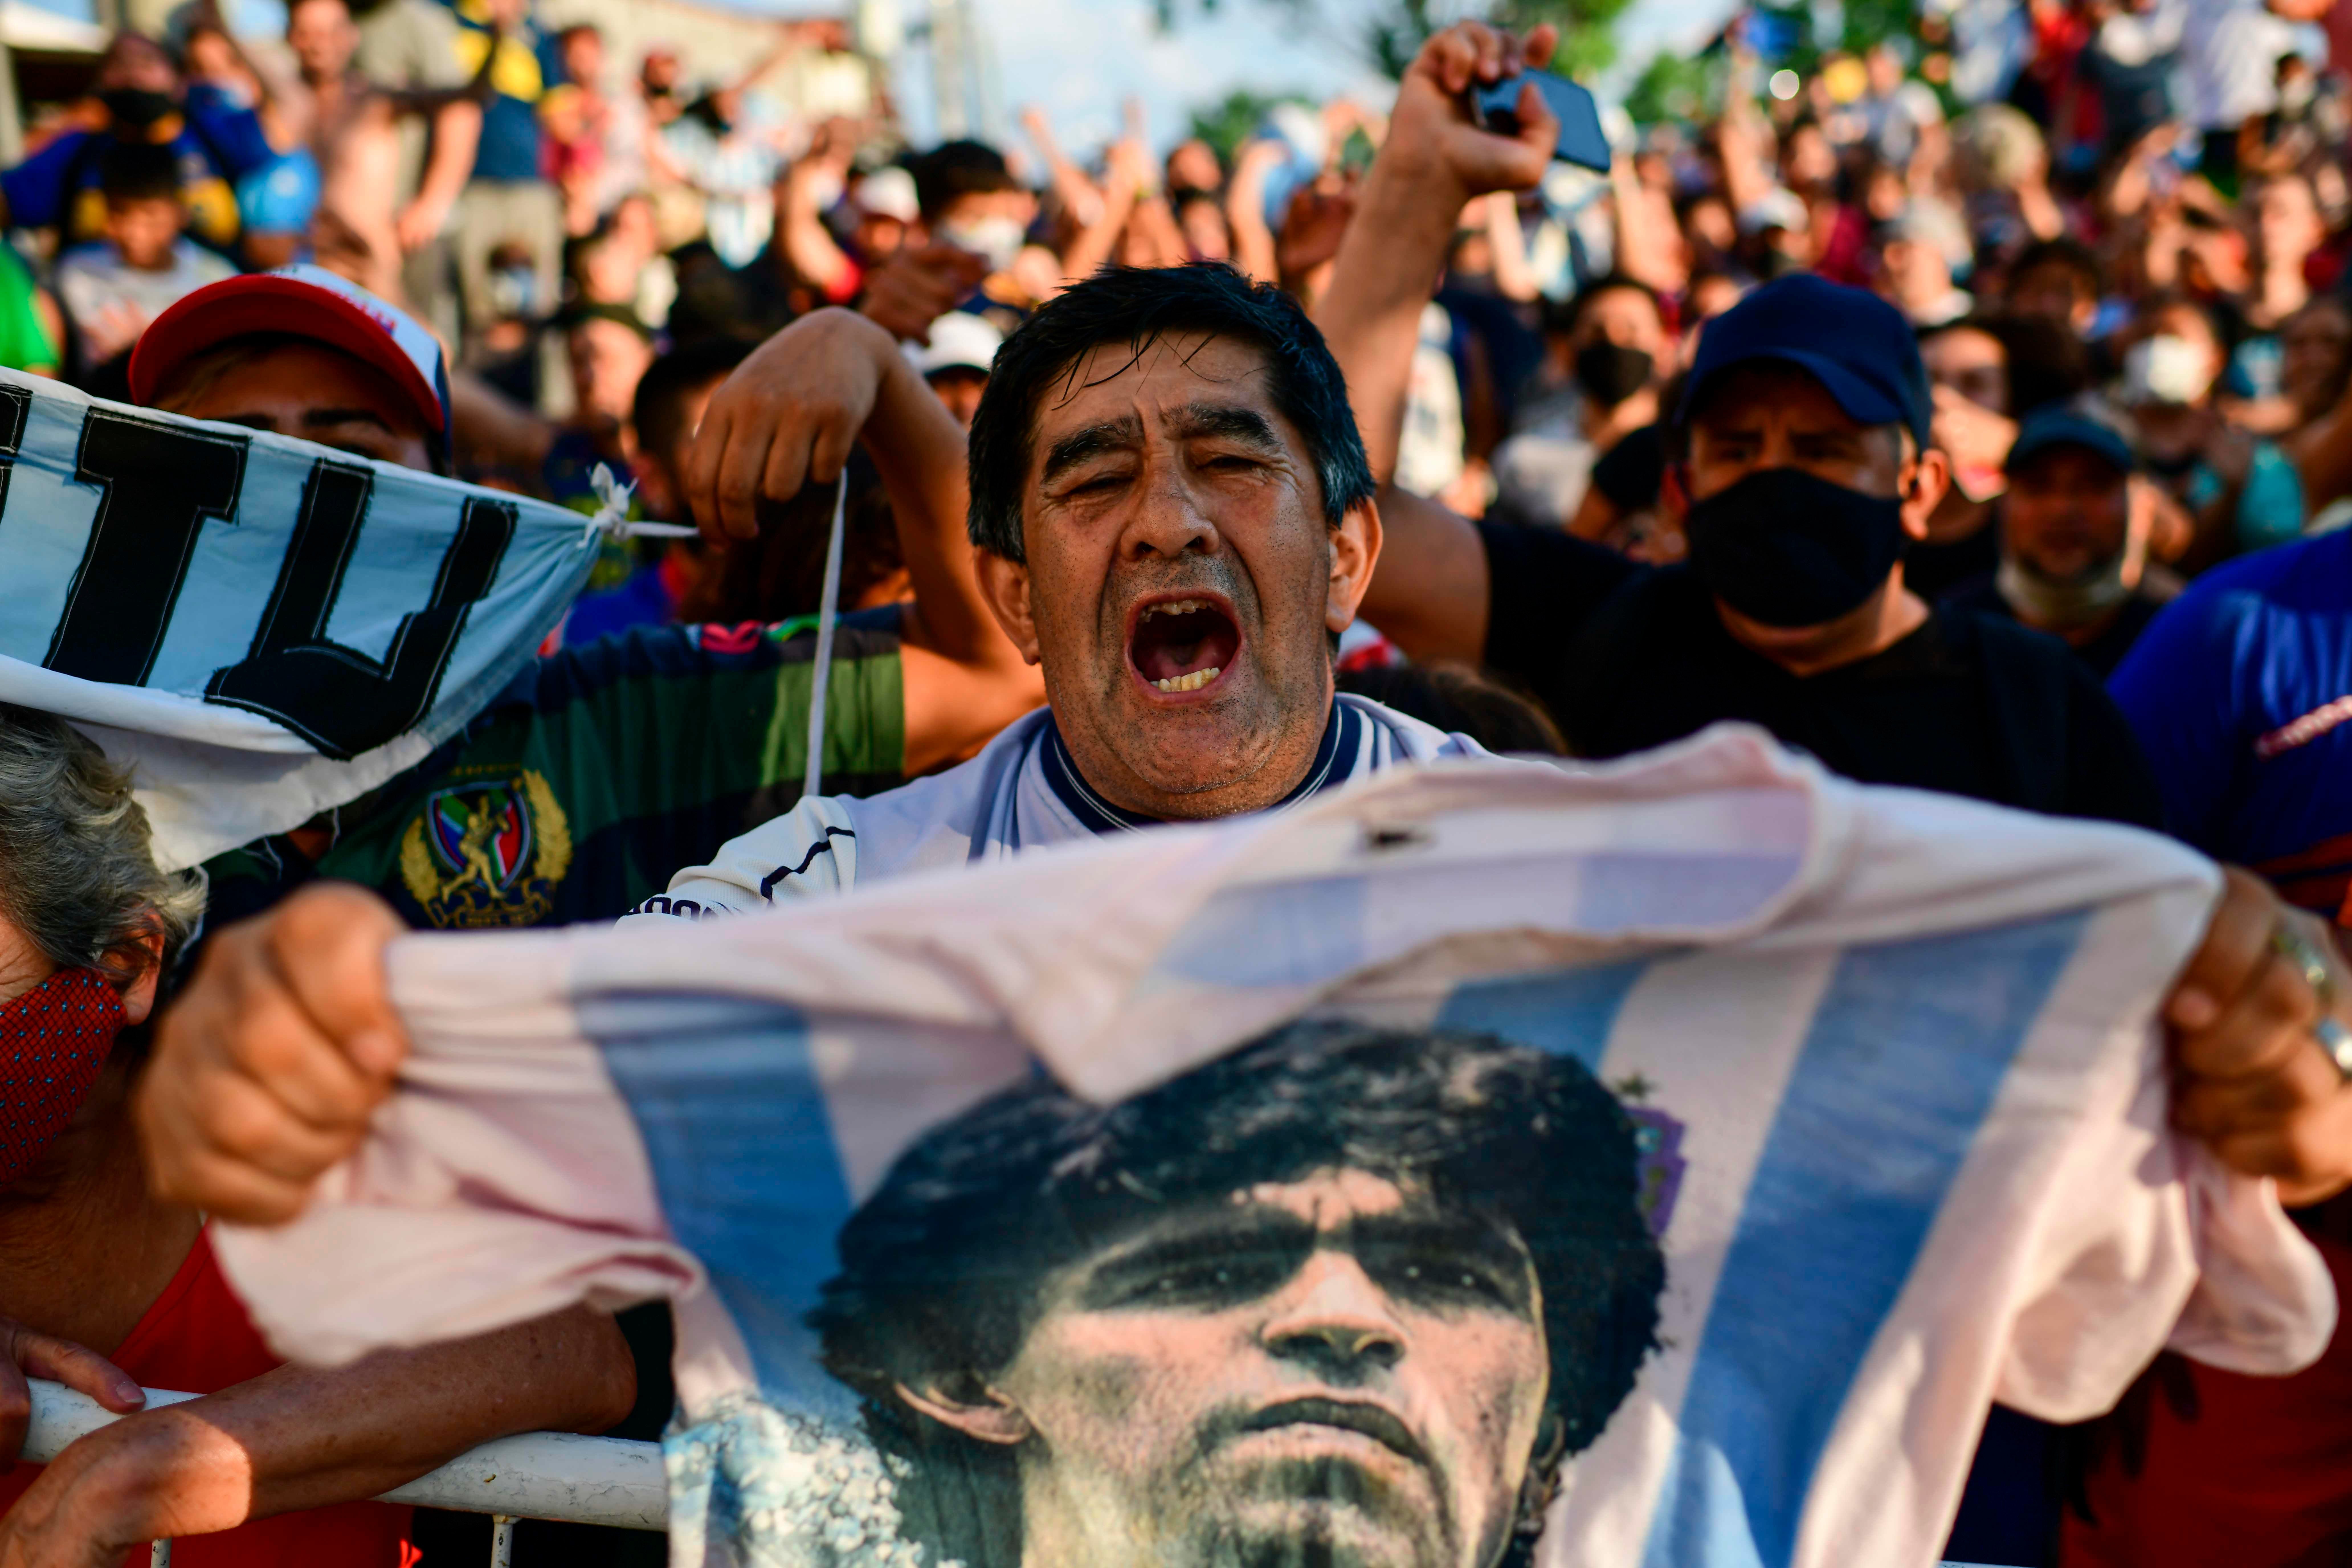 Football fans mourn the passing of Diego Maradona